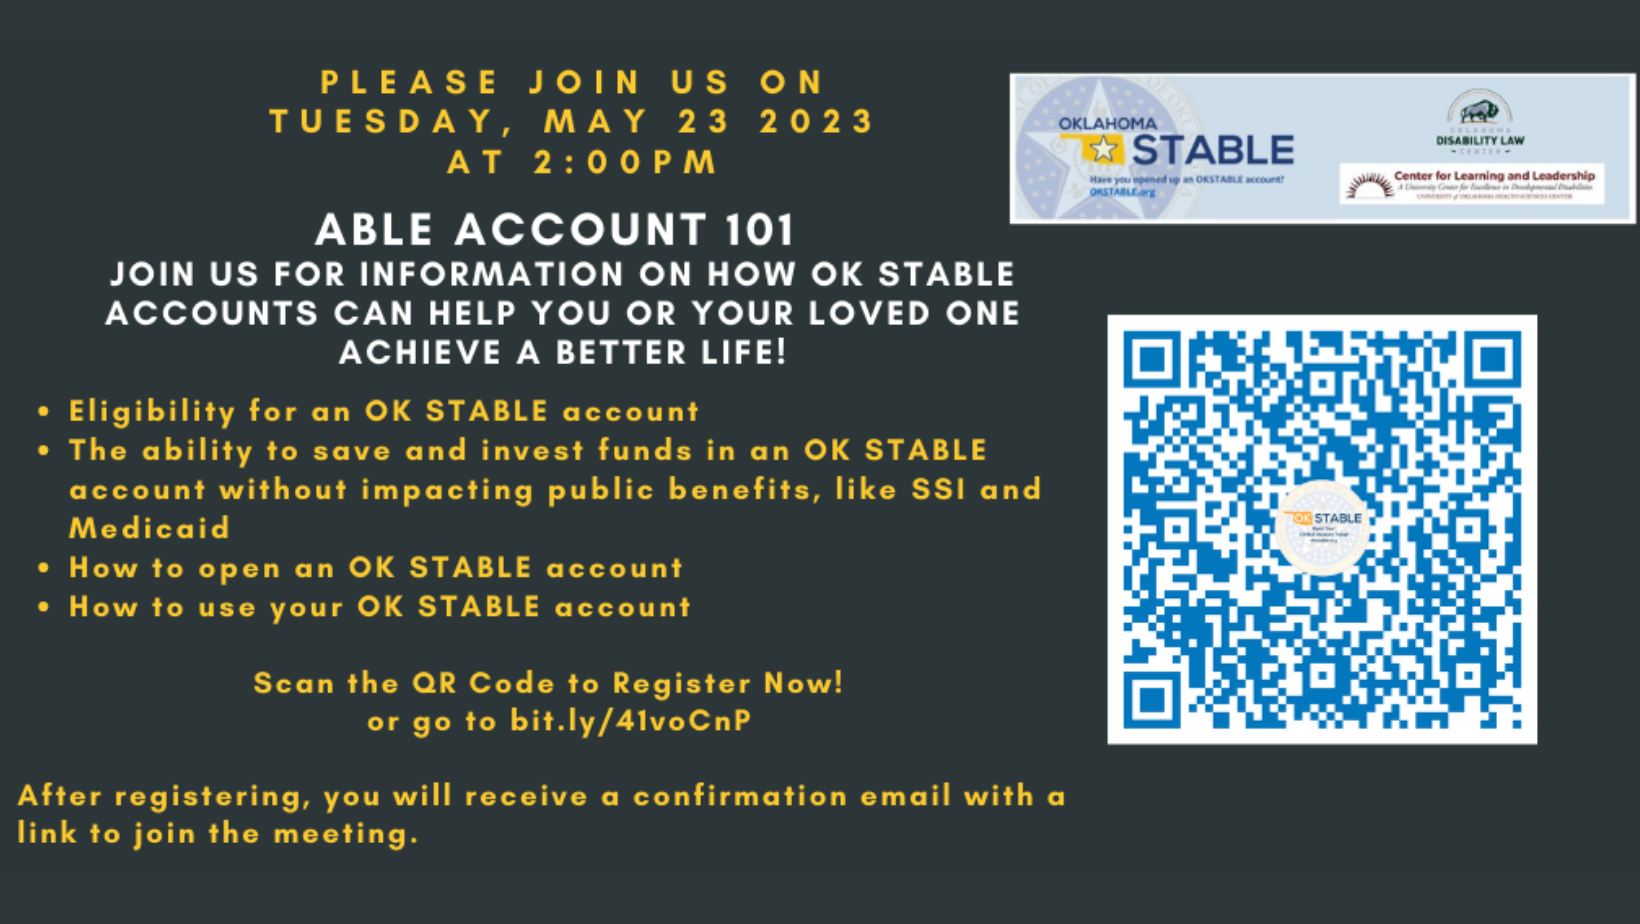 Join us on May 23rd at noon for an OK Stable Account Training